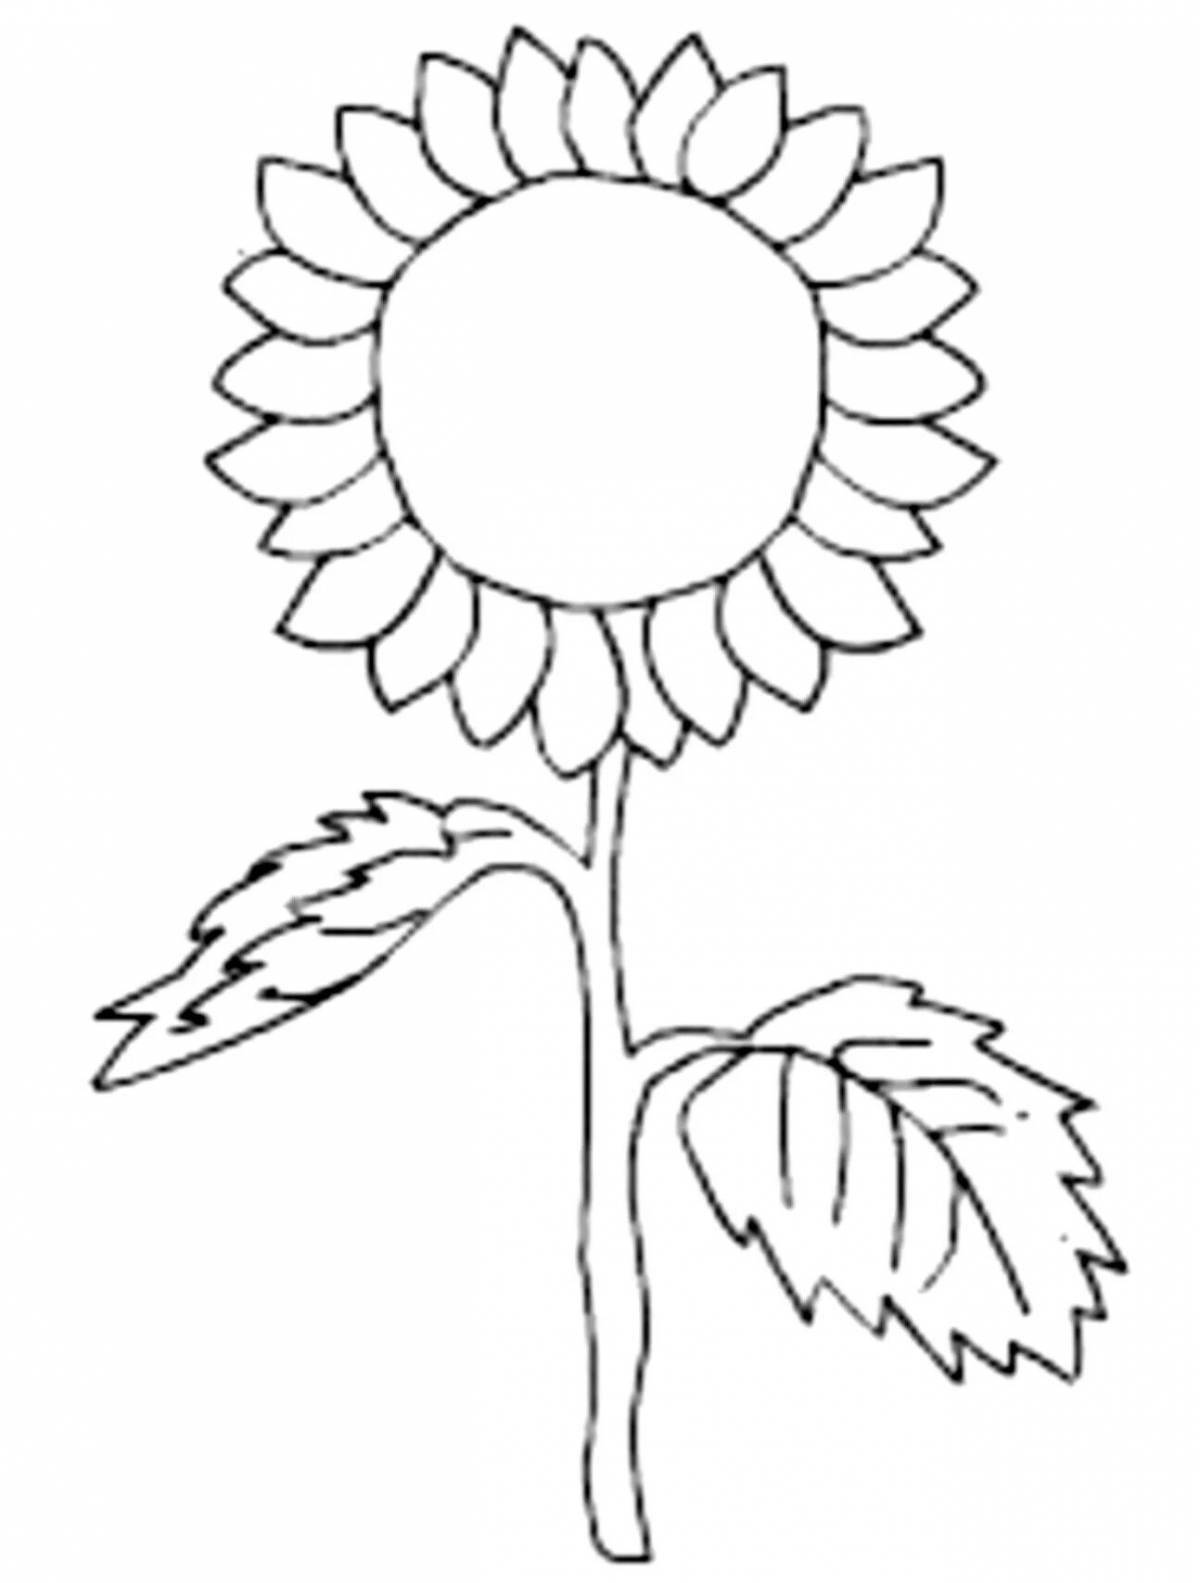 Glowing sunflower coloring book for kids 2-3 years old